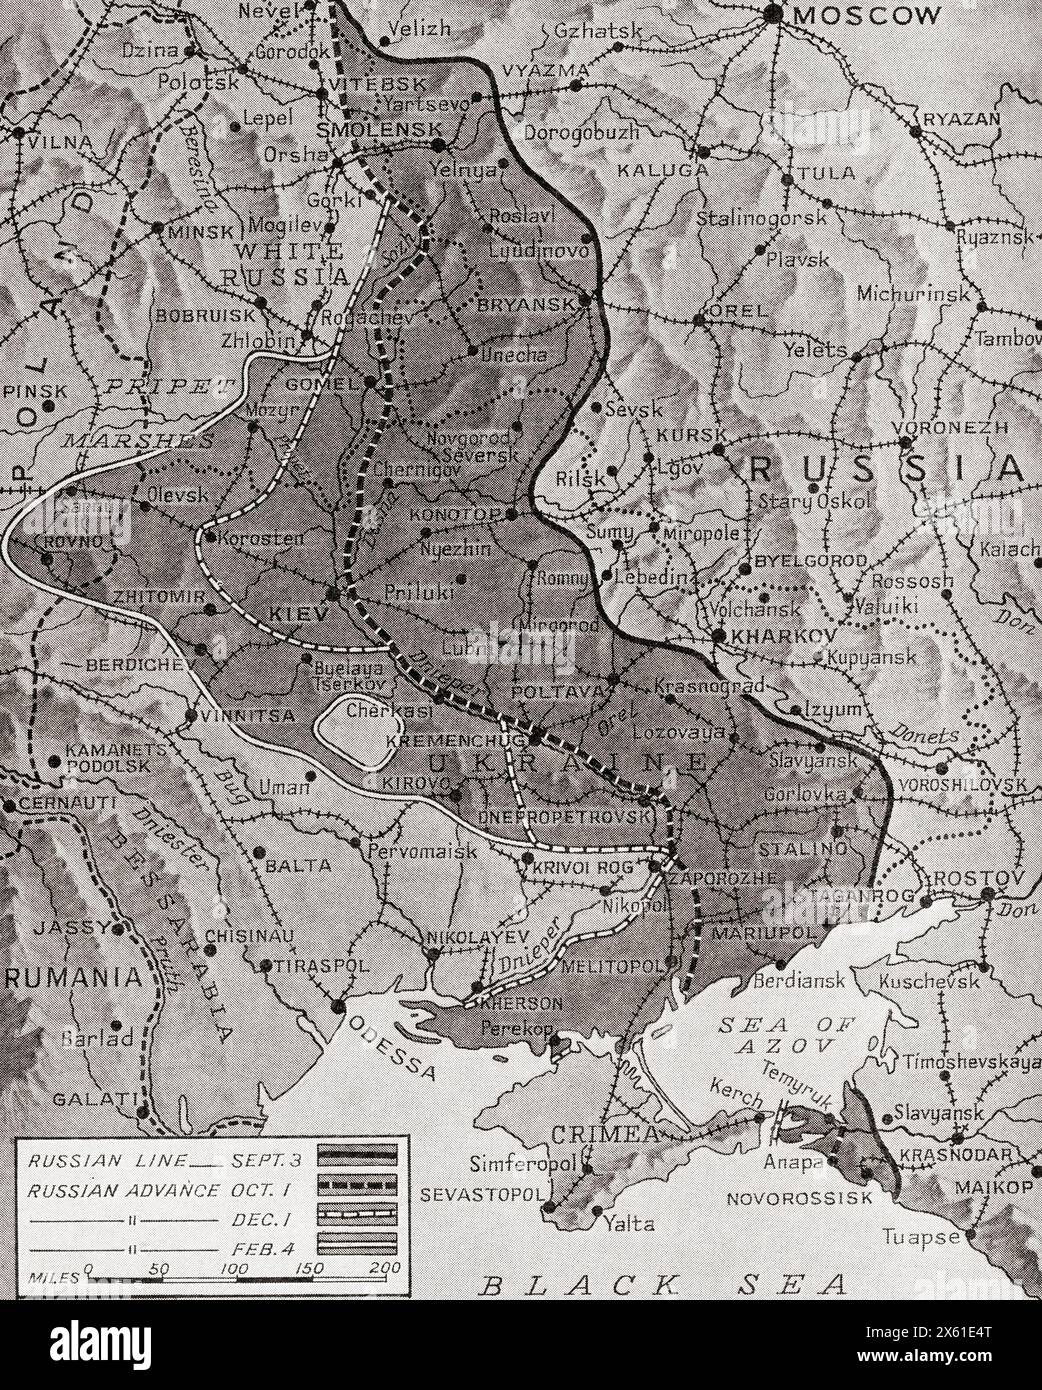 Map showing the Russian advance in October 1943, the Red Army launched an offensive of a 1,000 mile front from Vitebsk to the Taman Peninsula, Russia, wiping out German bridgeheads on the way.  From The War in Pictures, Fifth Year. Stock Photo